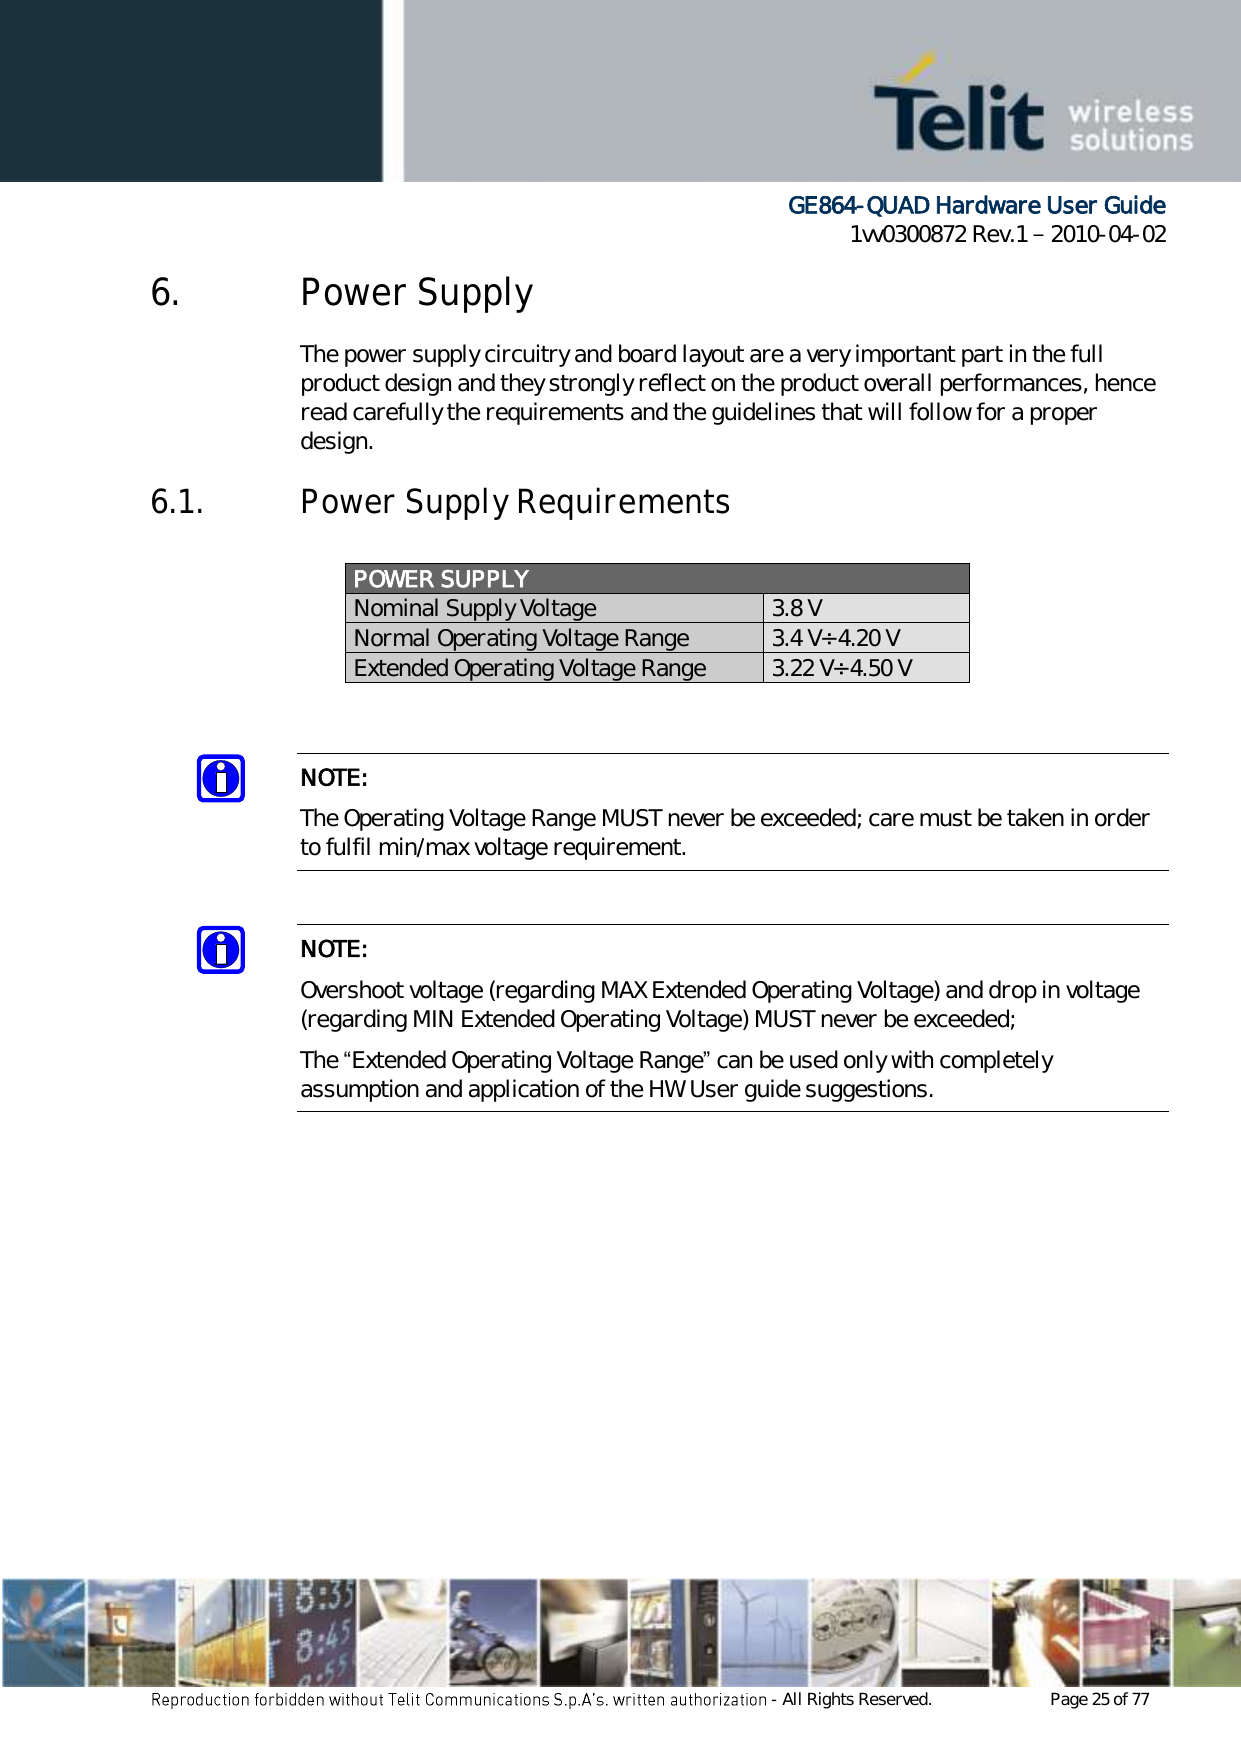      GE864-QUAD Hardware User Guide 1vv0300872 Rev.1   2010-04-02 - All Rights Reserved.    Page 25 of 77  6. Power Supply The power supply circuitry and board layout are a very important part in the full product design and they strongly reflect on the product overall performances, hence read carefully the requirements and the guidelines that will follow for a proper design. 6.1. Power Supply Requirements  POWER SUPPLY  Nominal Supply Voltage 3.8 V Normal Operating Voltage Range 3.4 V÷ 4.20 V Extended Operating Voltage Range 3.22 V÷ 4.50 V   NOTE: The Operating Voltage Range MUST never be exceeded; care must be taken in order to fulfil min/max voltage requirement.  NOTE: Overshoot voltage (regarding MAX Extended Operating Voltage) and drop in voltage (regarding MIN Extended Operating Voltage) MUST never be exceeded;  The “Extended Operating Voltage Range” can be used only with completely assumption and application of the HW User guide suggestions.             